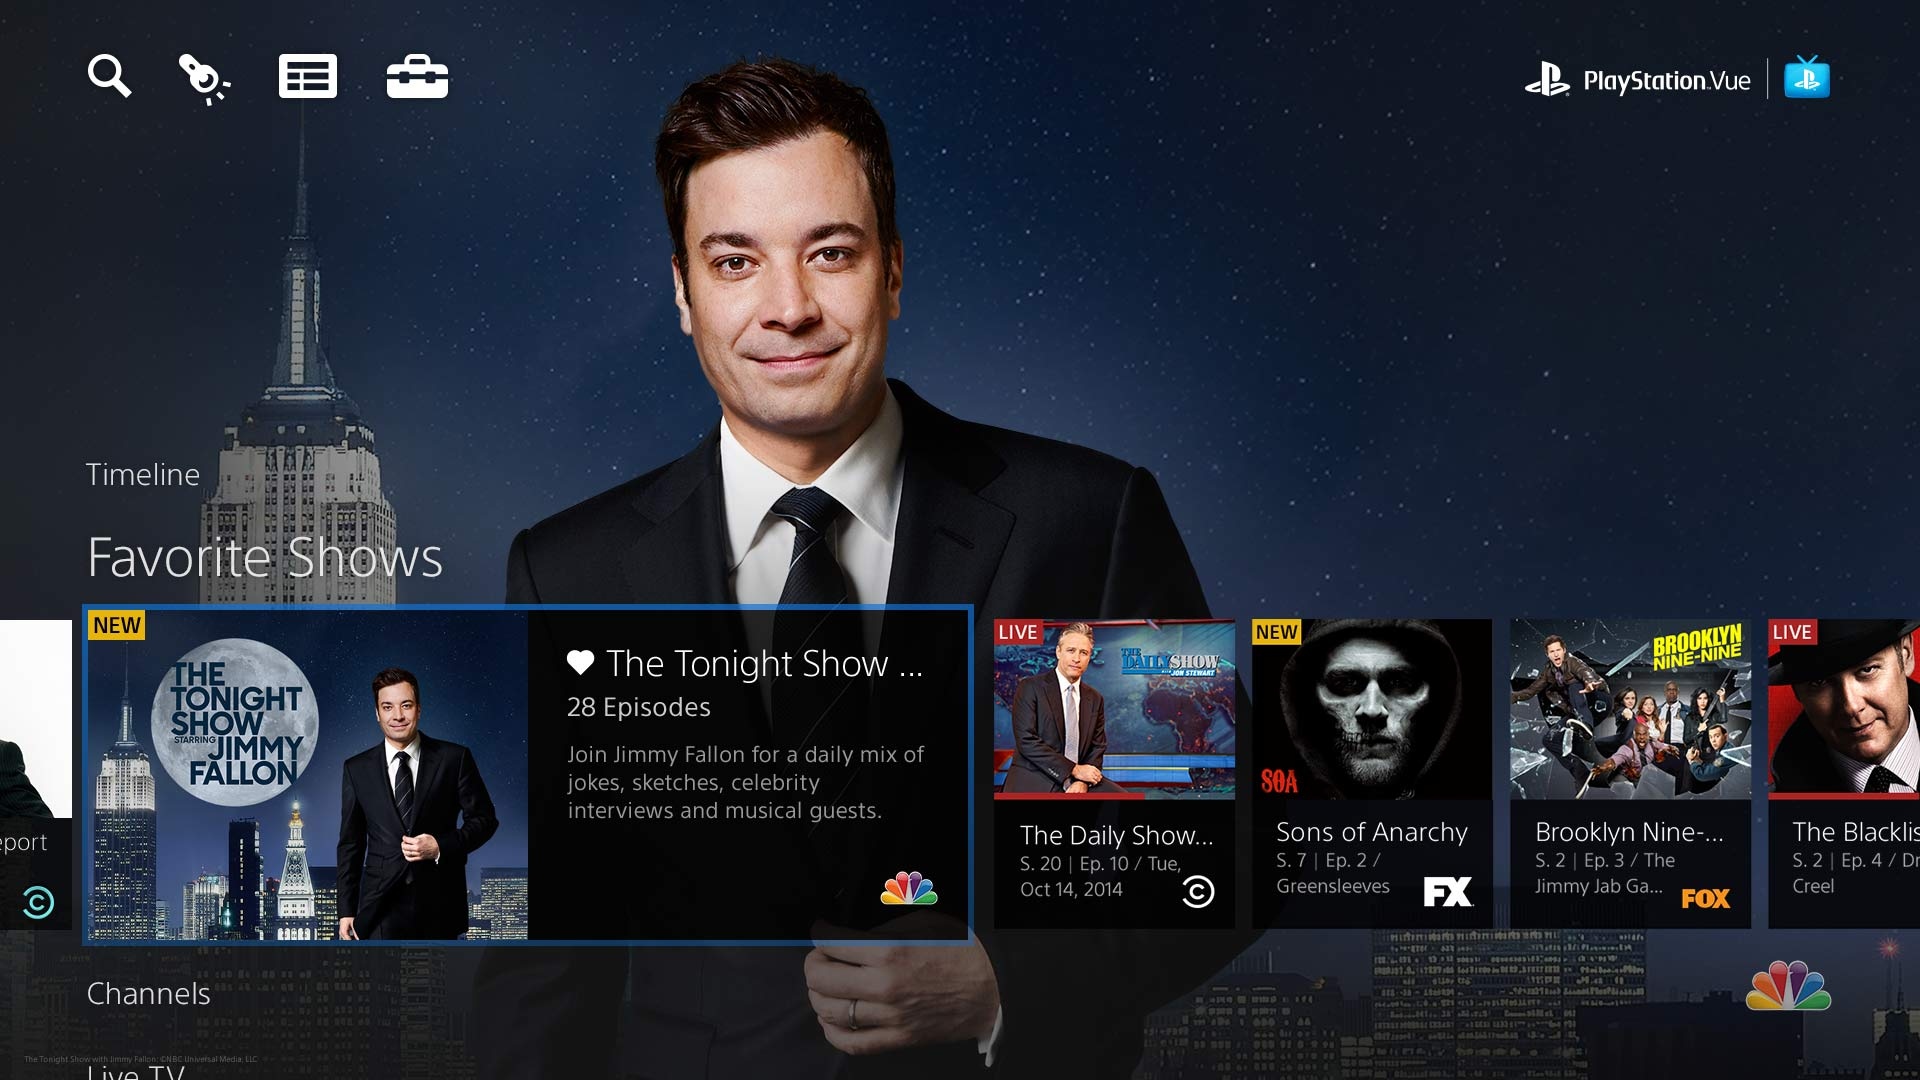 What We Know About the Future of PlayStation Vue & Roku…